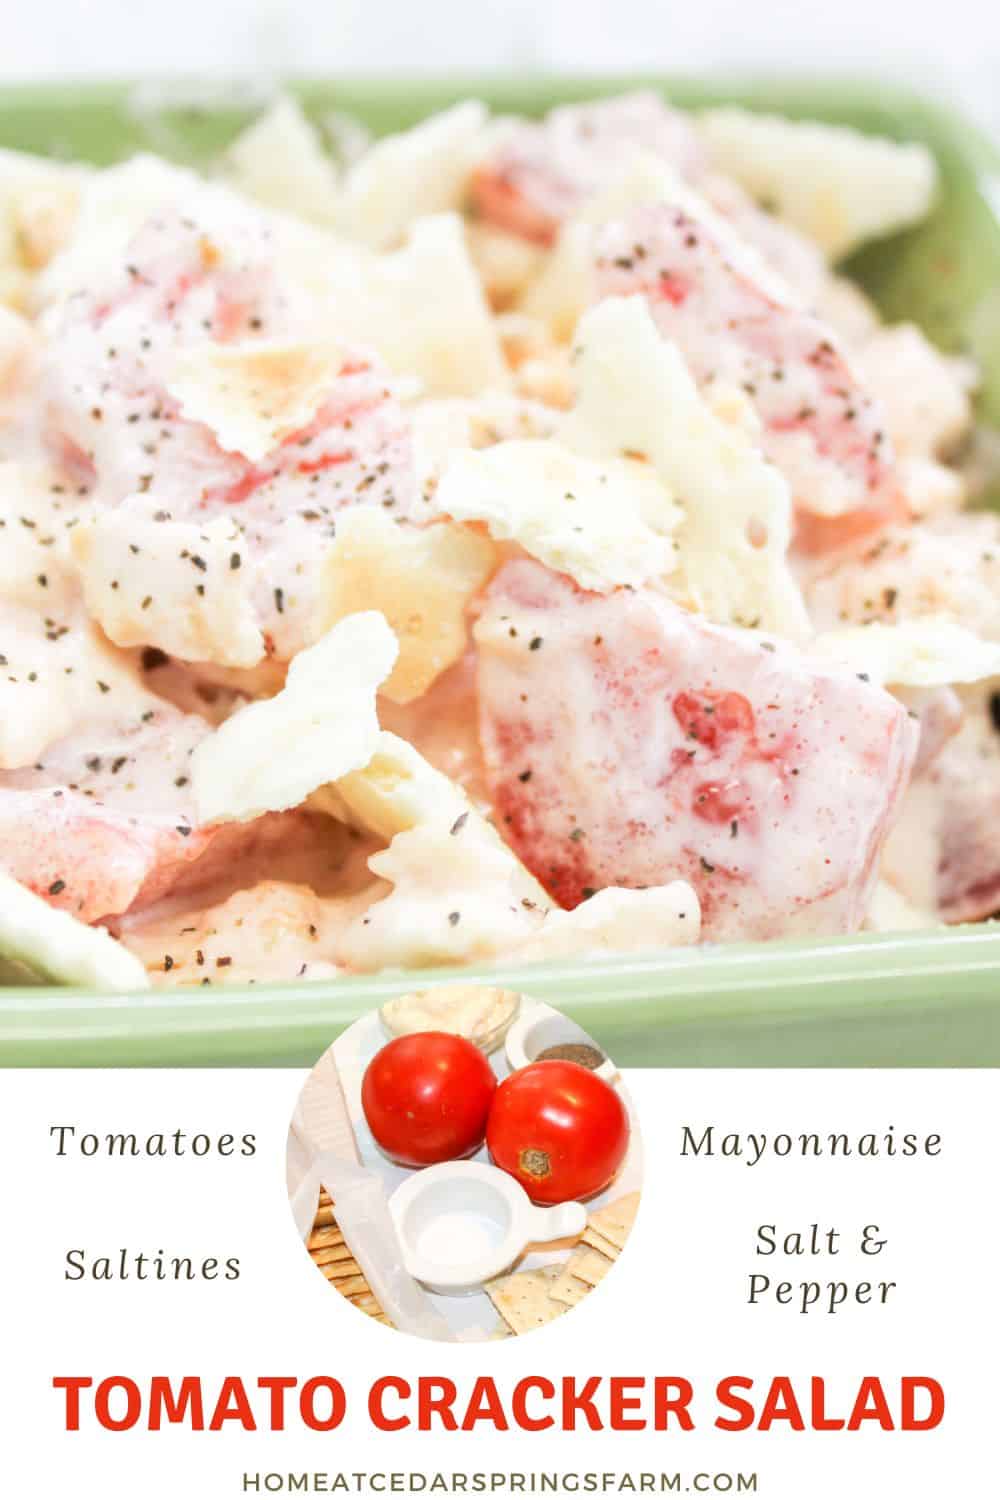 Tomato cracker salad in a green bowl with ingredients picture inserted with text overlay.